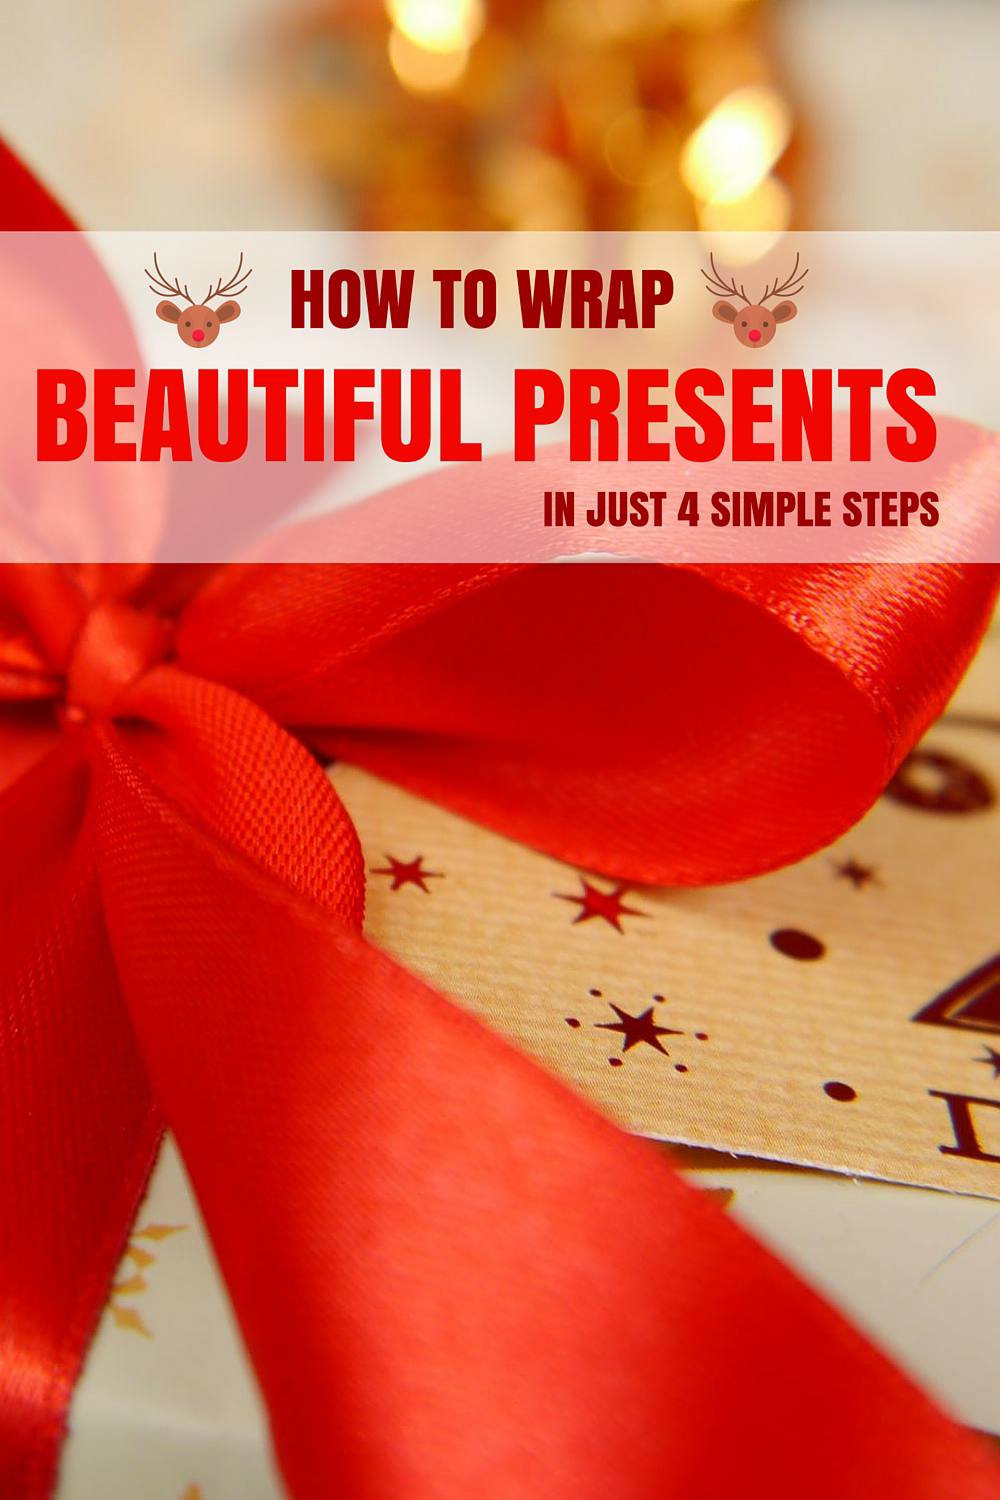 How To Wrap Beautiful Presents in Just 4 Simple Steps JPG